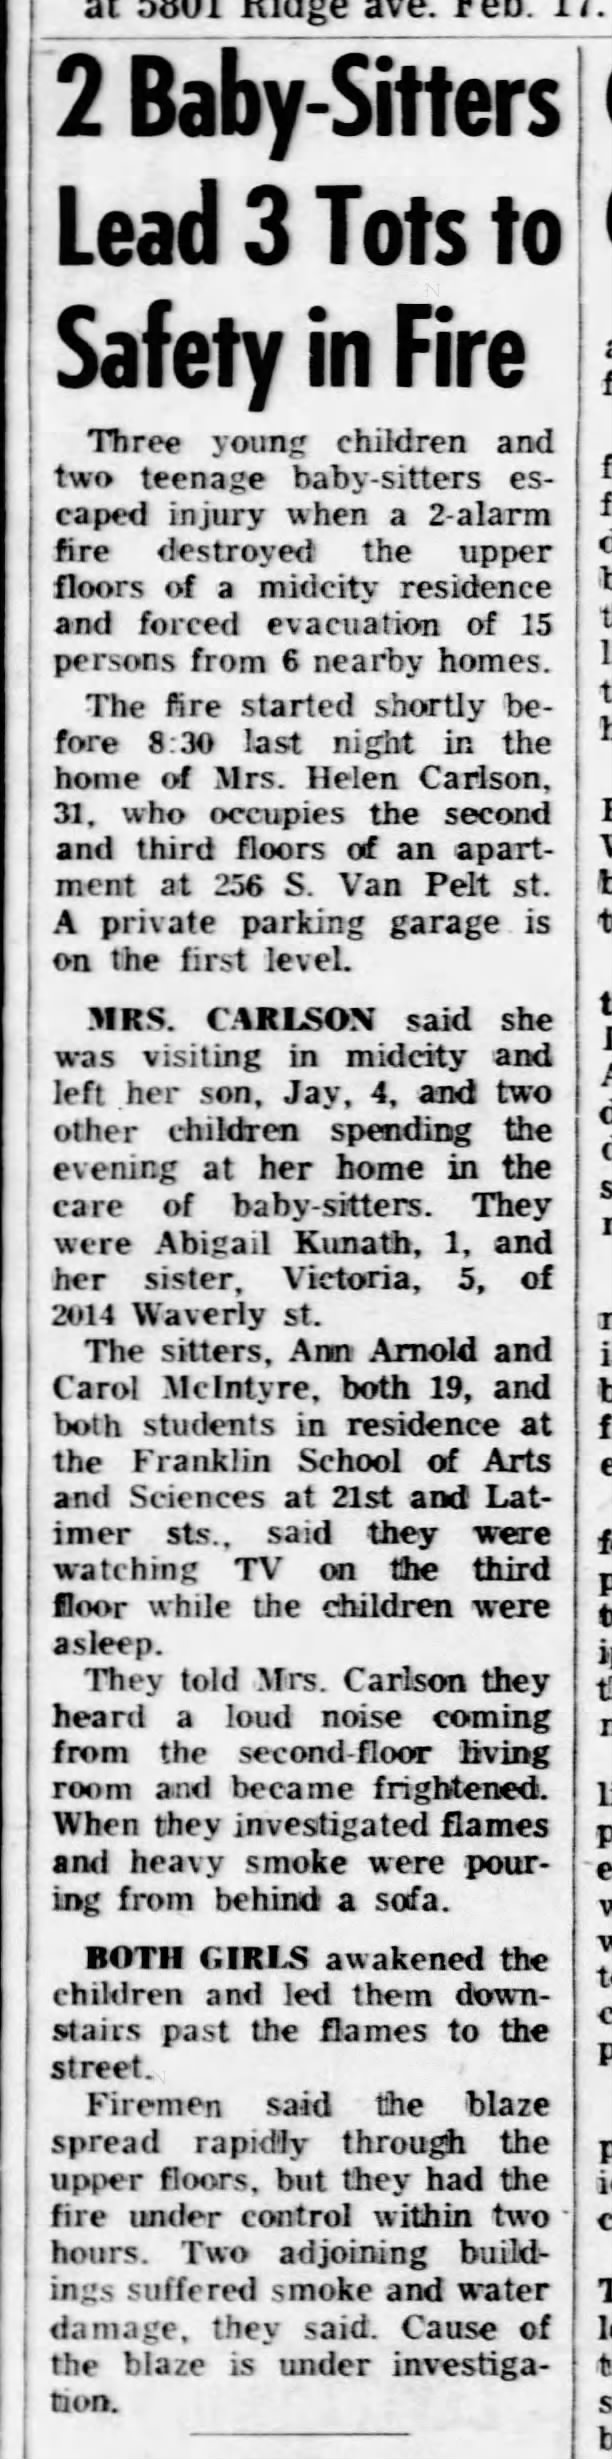 2 Babysitters Lead 3 Tots to Safety in Fire, 1970